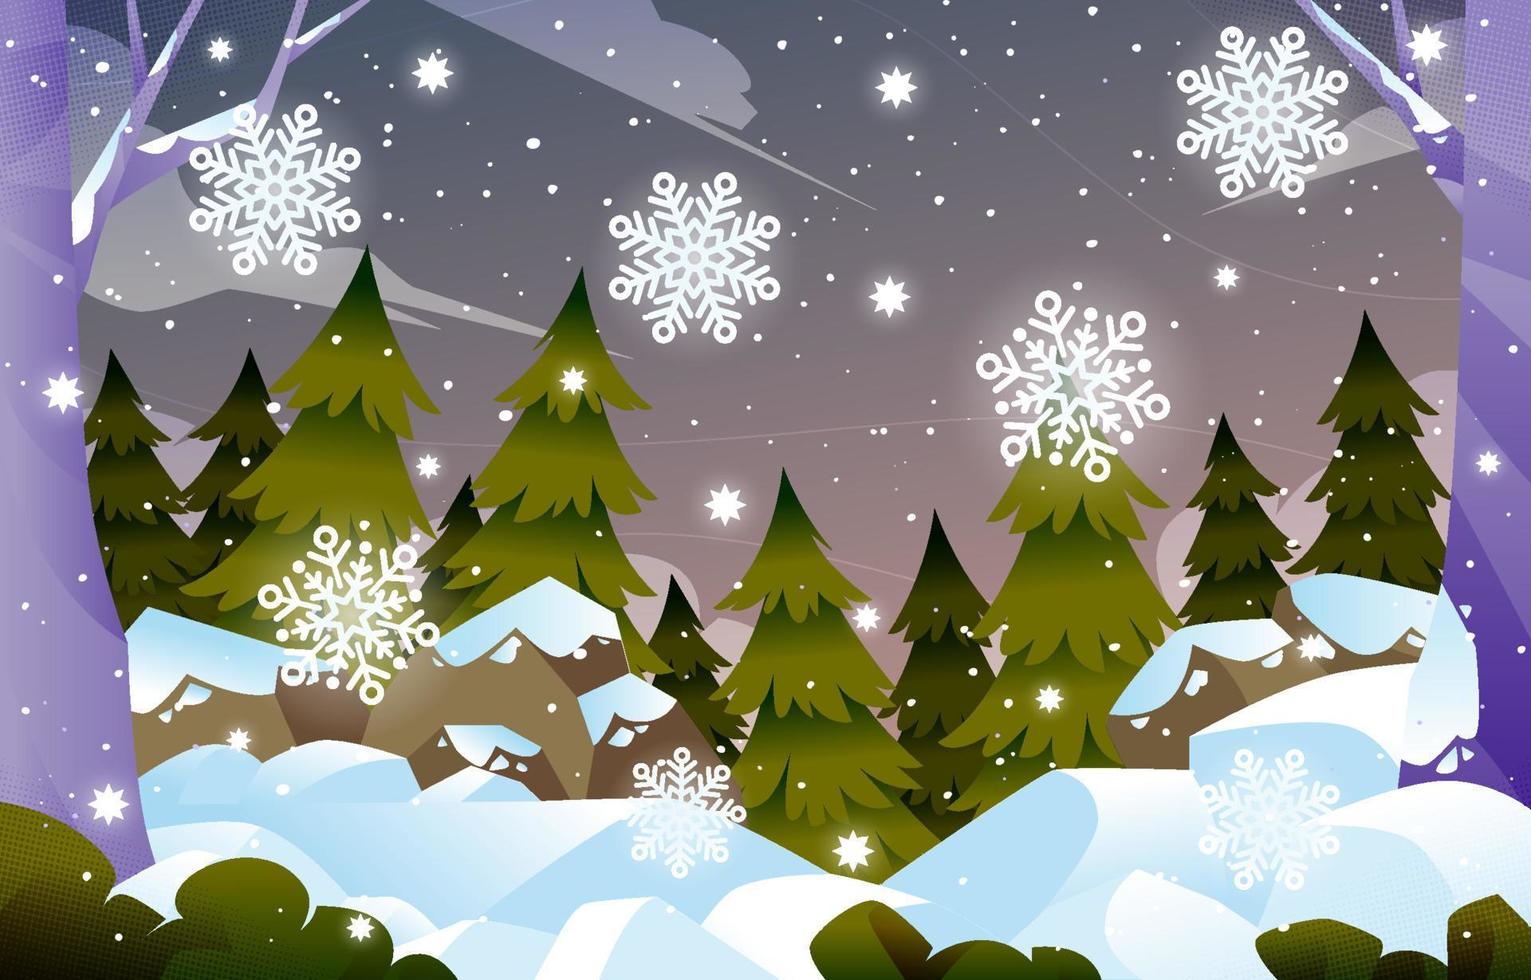 Blue Winter Snowflakes Background vector